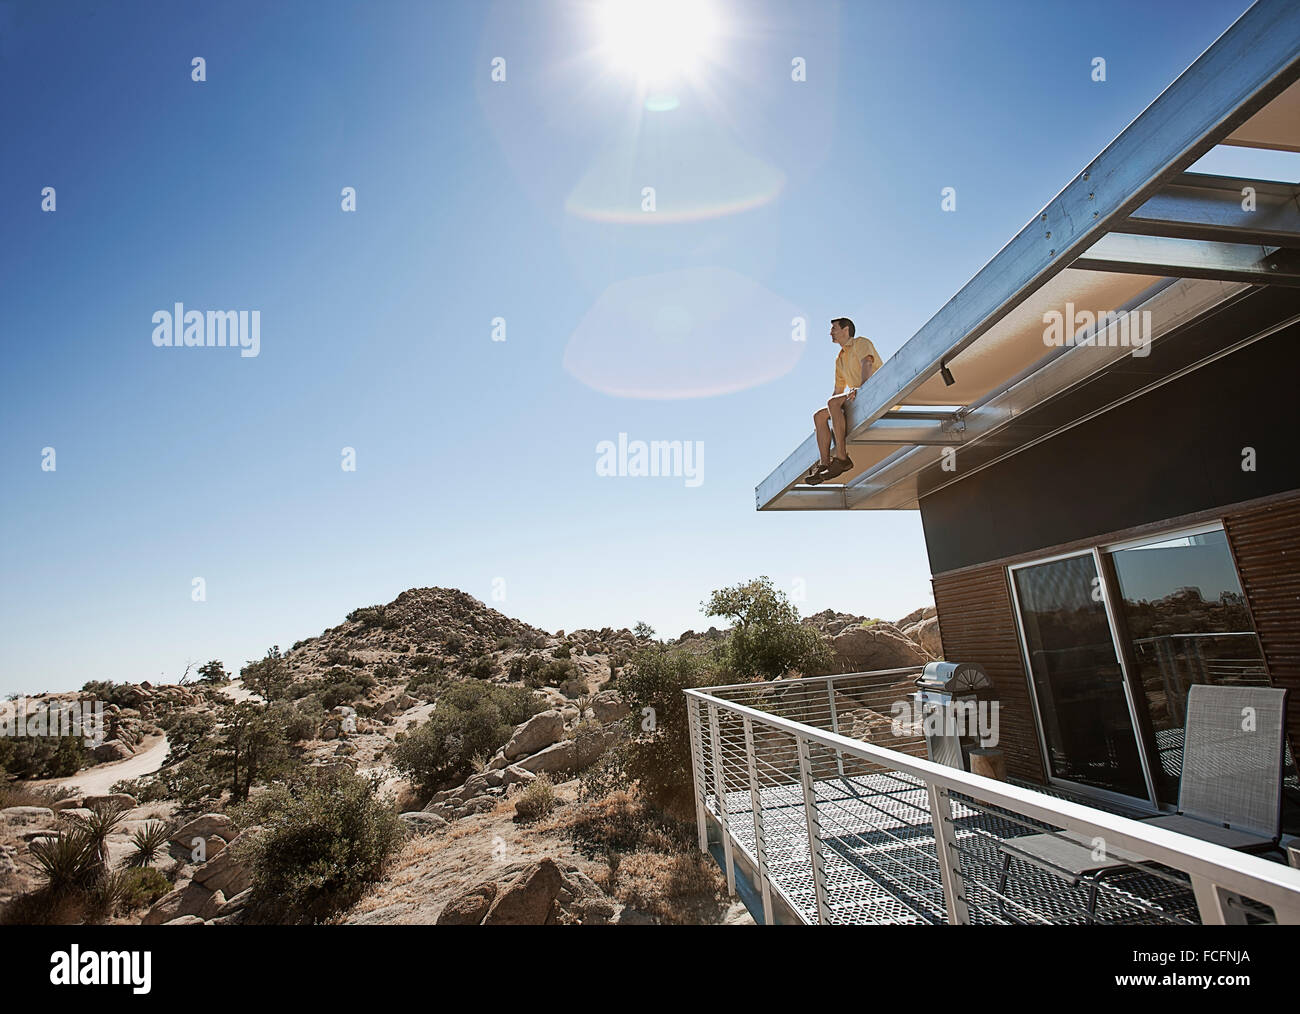 A man sitting on the roof overhang of an eco home in the desert landscape. Stock Photo